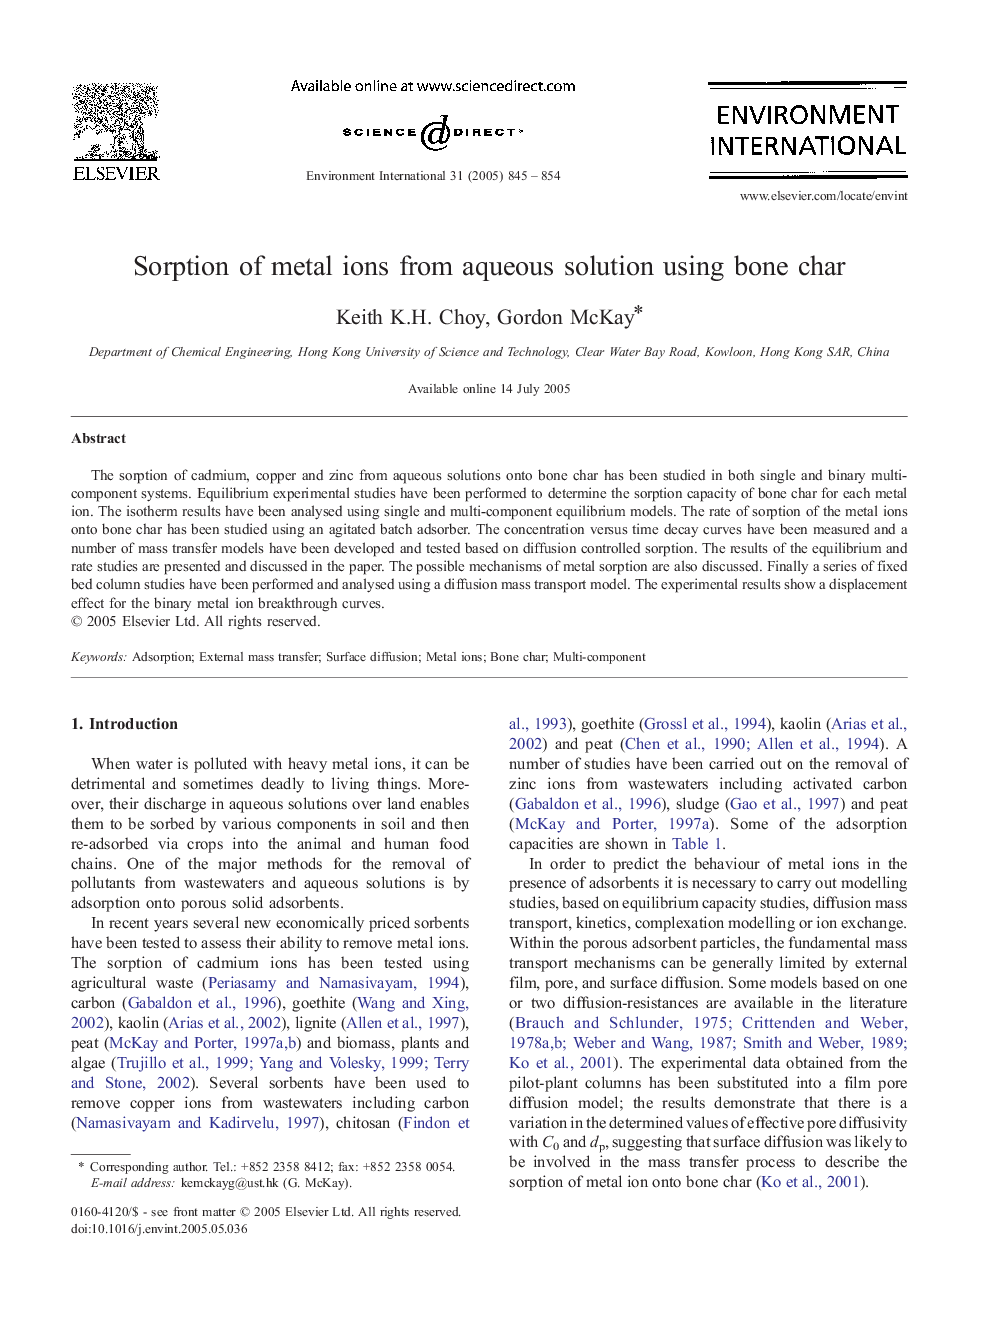 Sorption of metal ions from aqueous solution using bone char